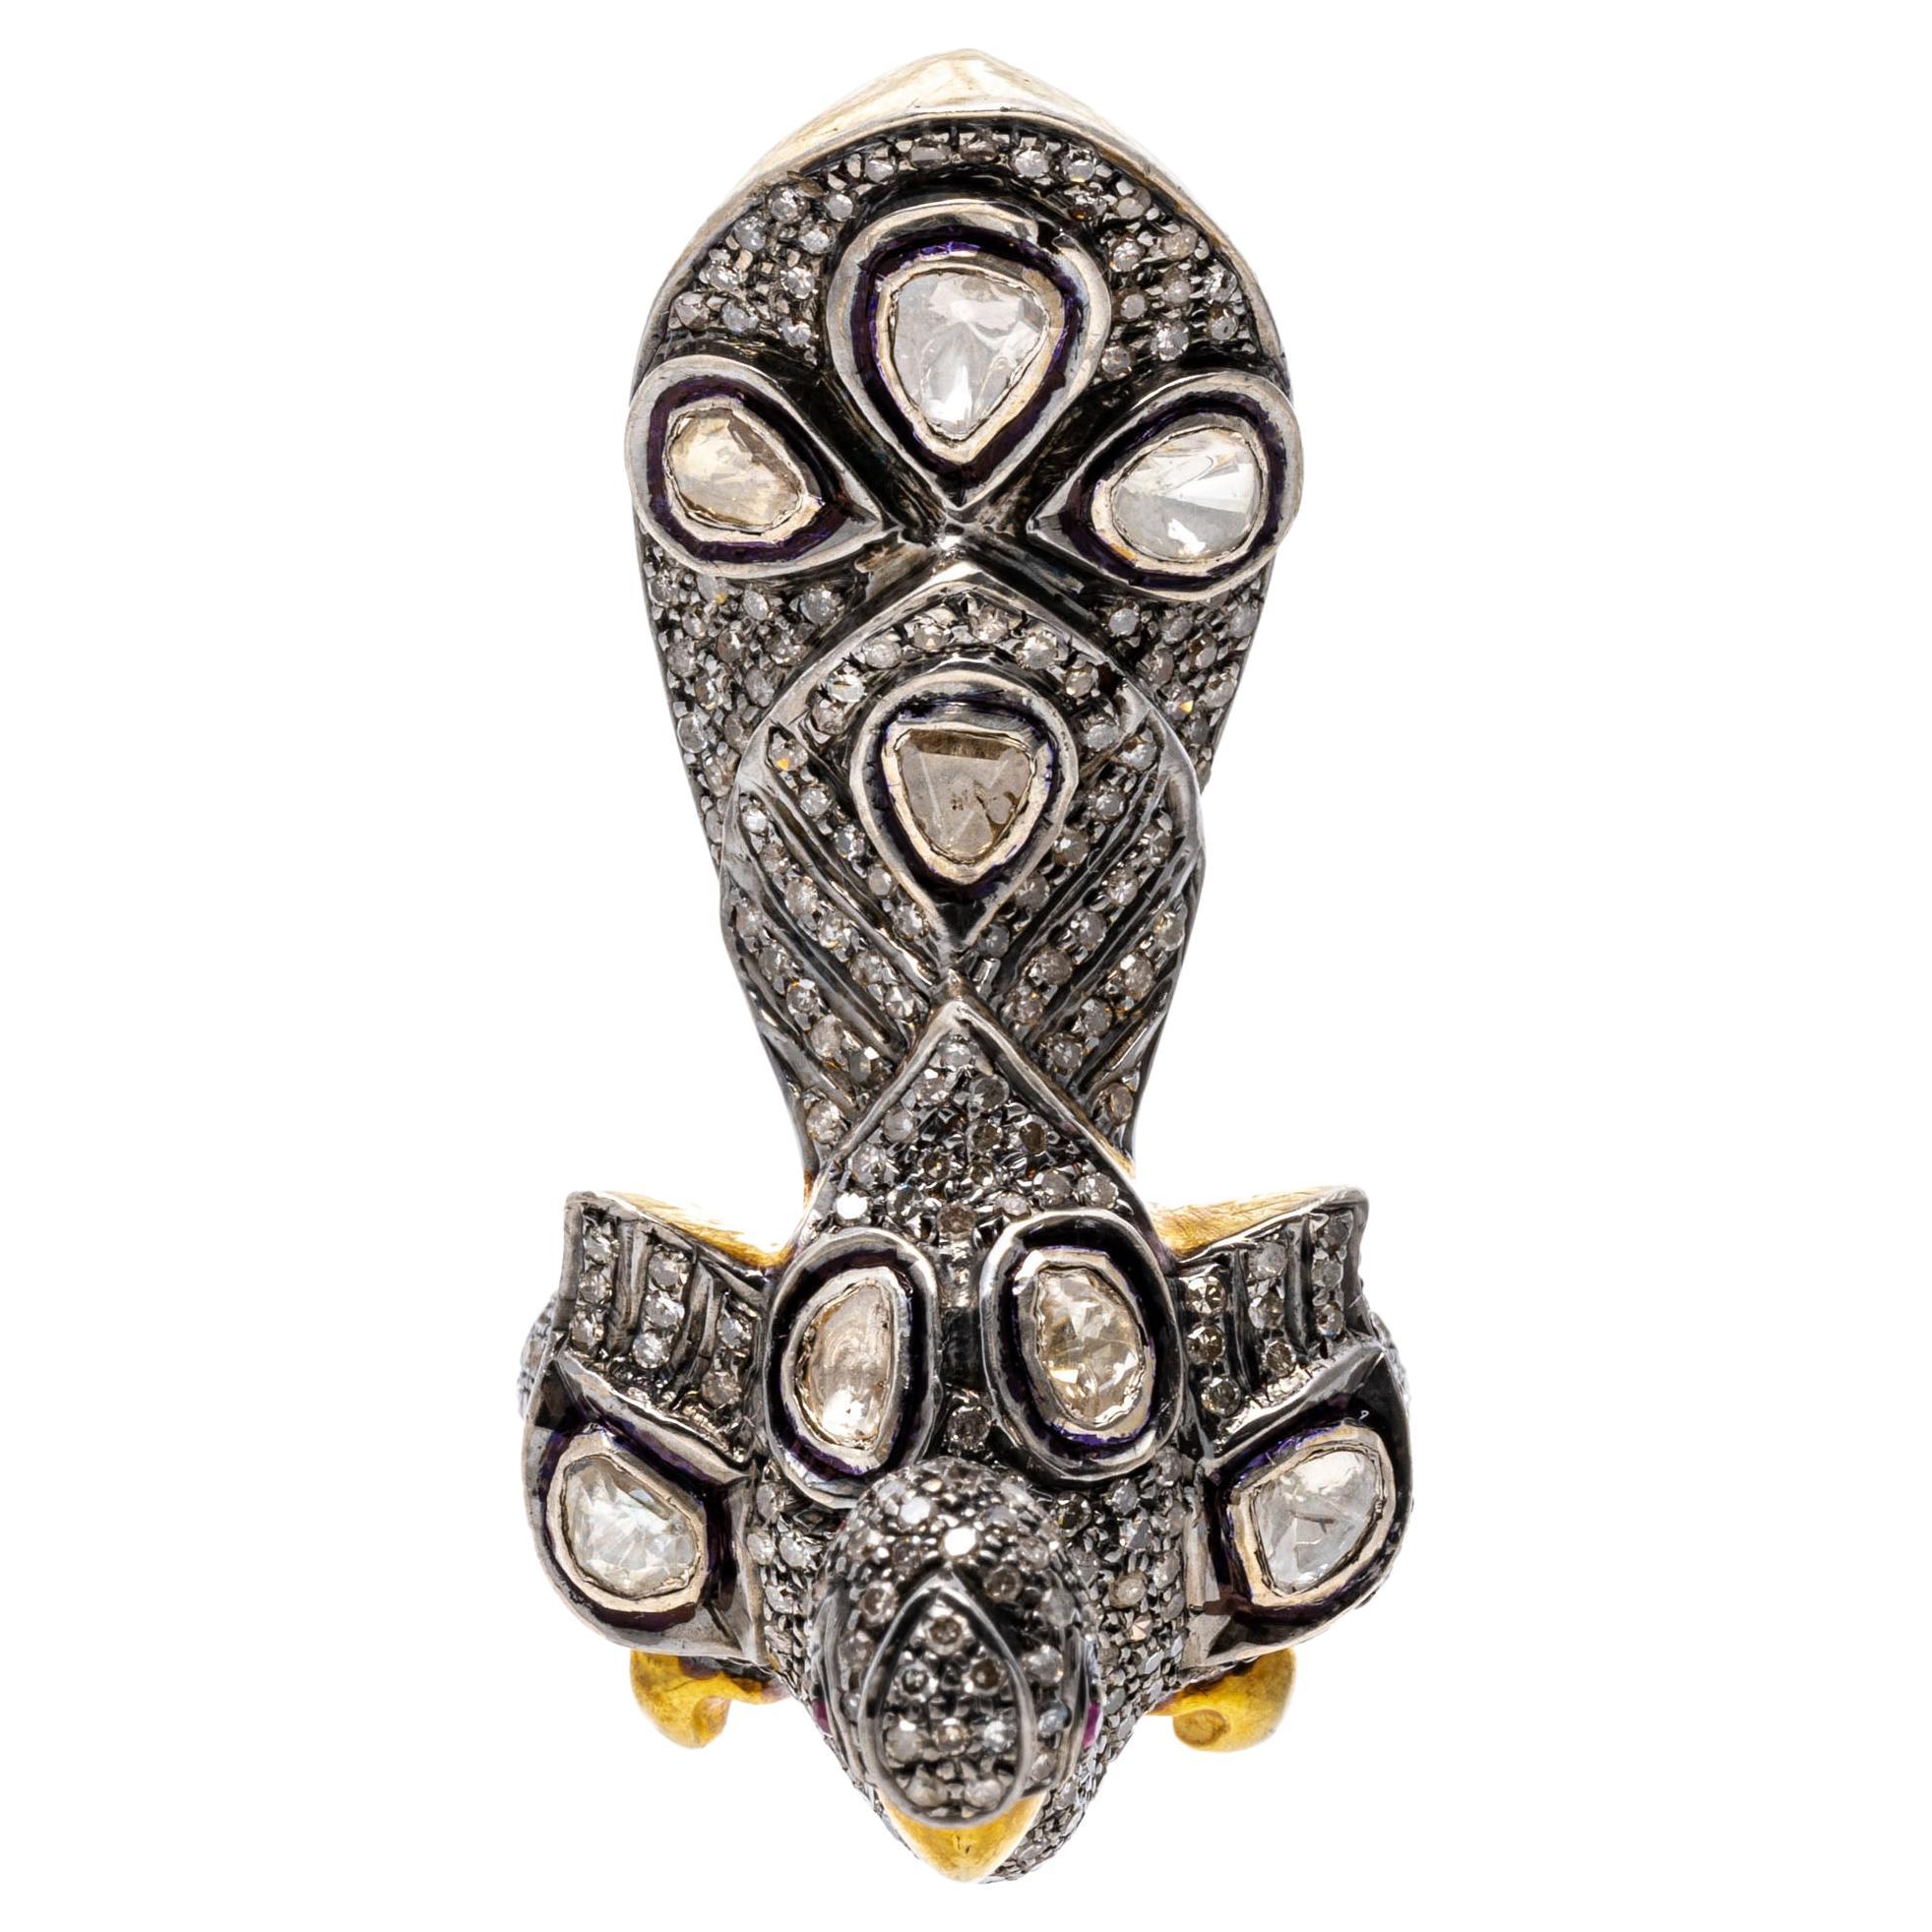 Sterling silver ring. This magnificent ring is a figural peacock, set in the entirety with pave set, round faceted diamonds and studded with bezel set, macle cut diamonds in between. Highlighting the beak and feet is a high polished vermeil finish